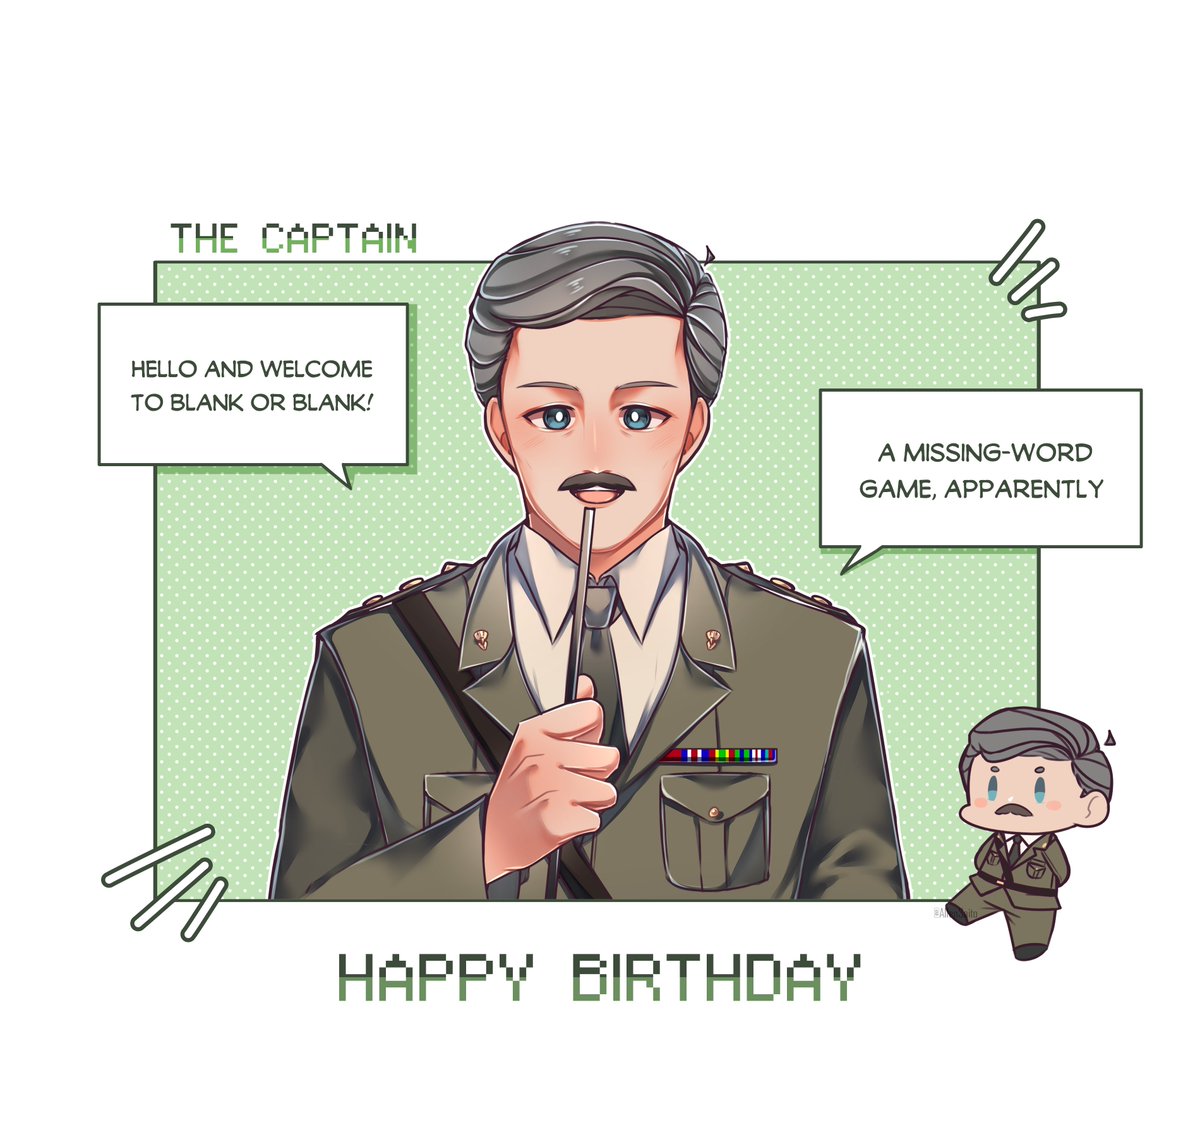 Happy Birthday Ben! ✨
Here's a little drawing of cap-cap and on of my favorite character from Horrible Histories 🥰
.
.
.
#BBCGhosts #horriblehistories #fanart #digitalart